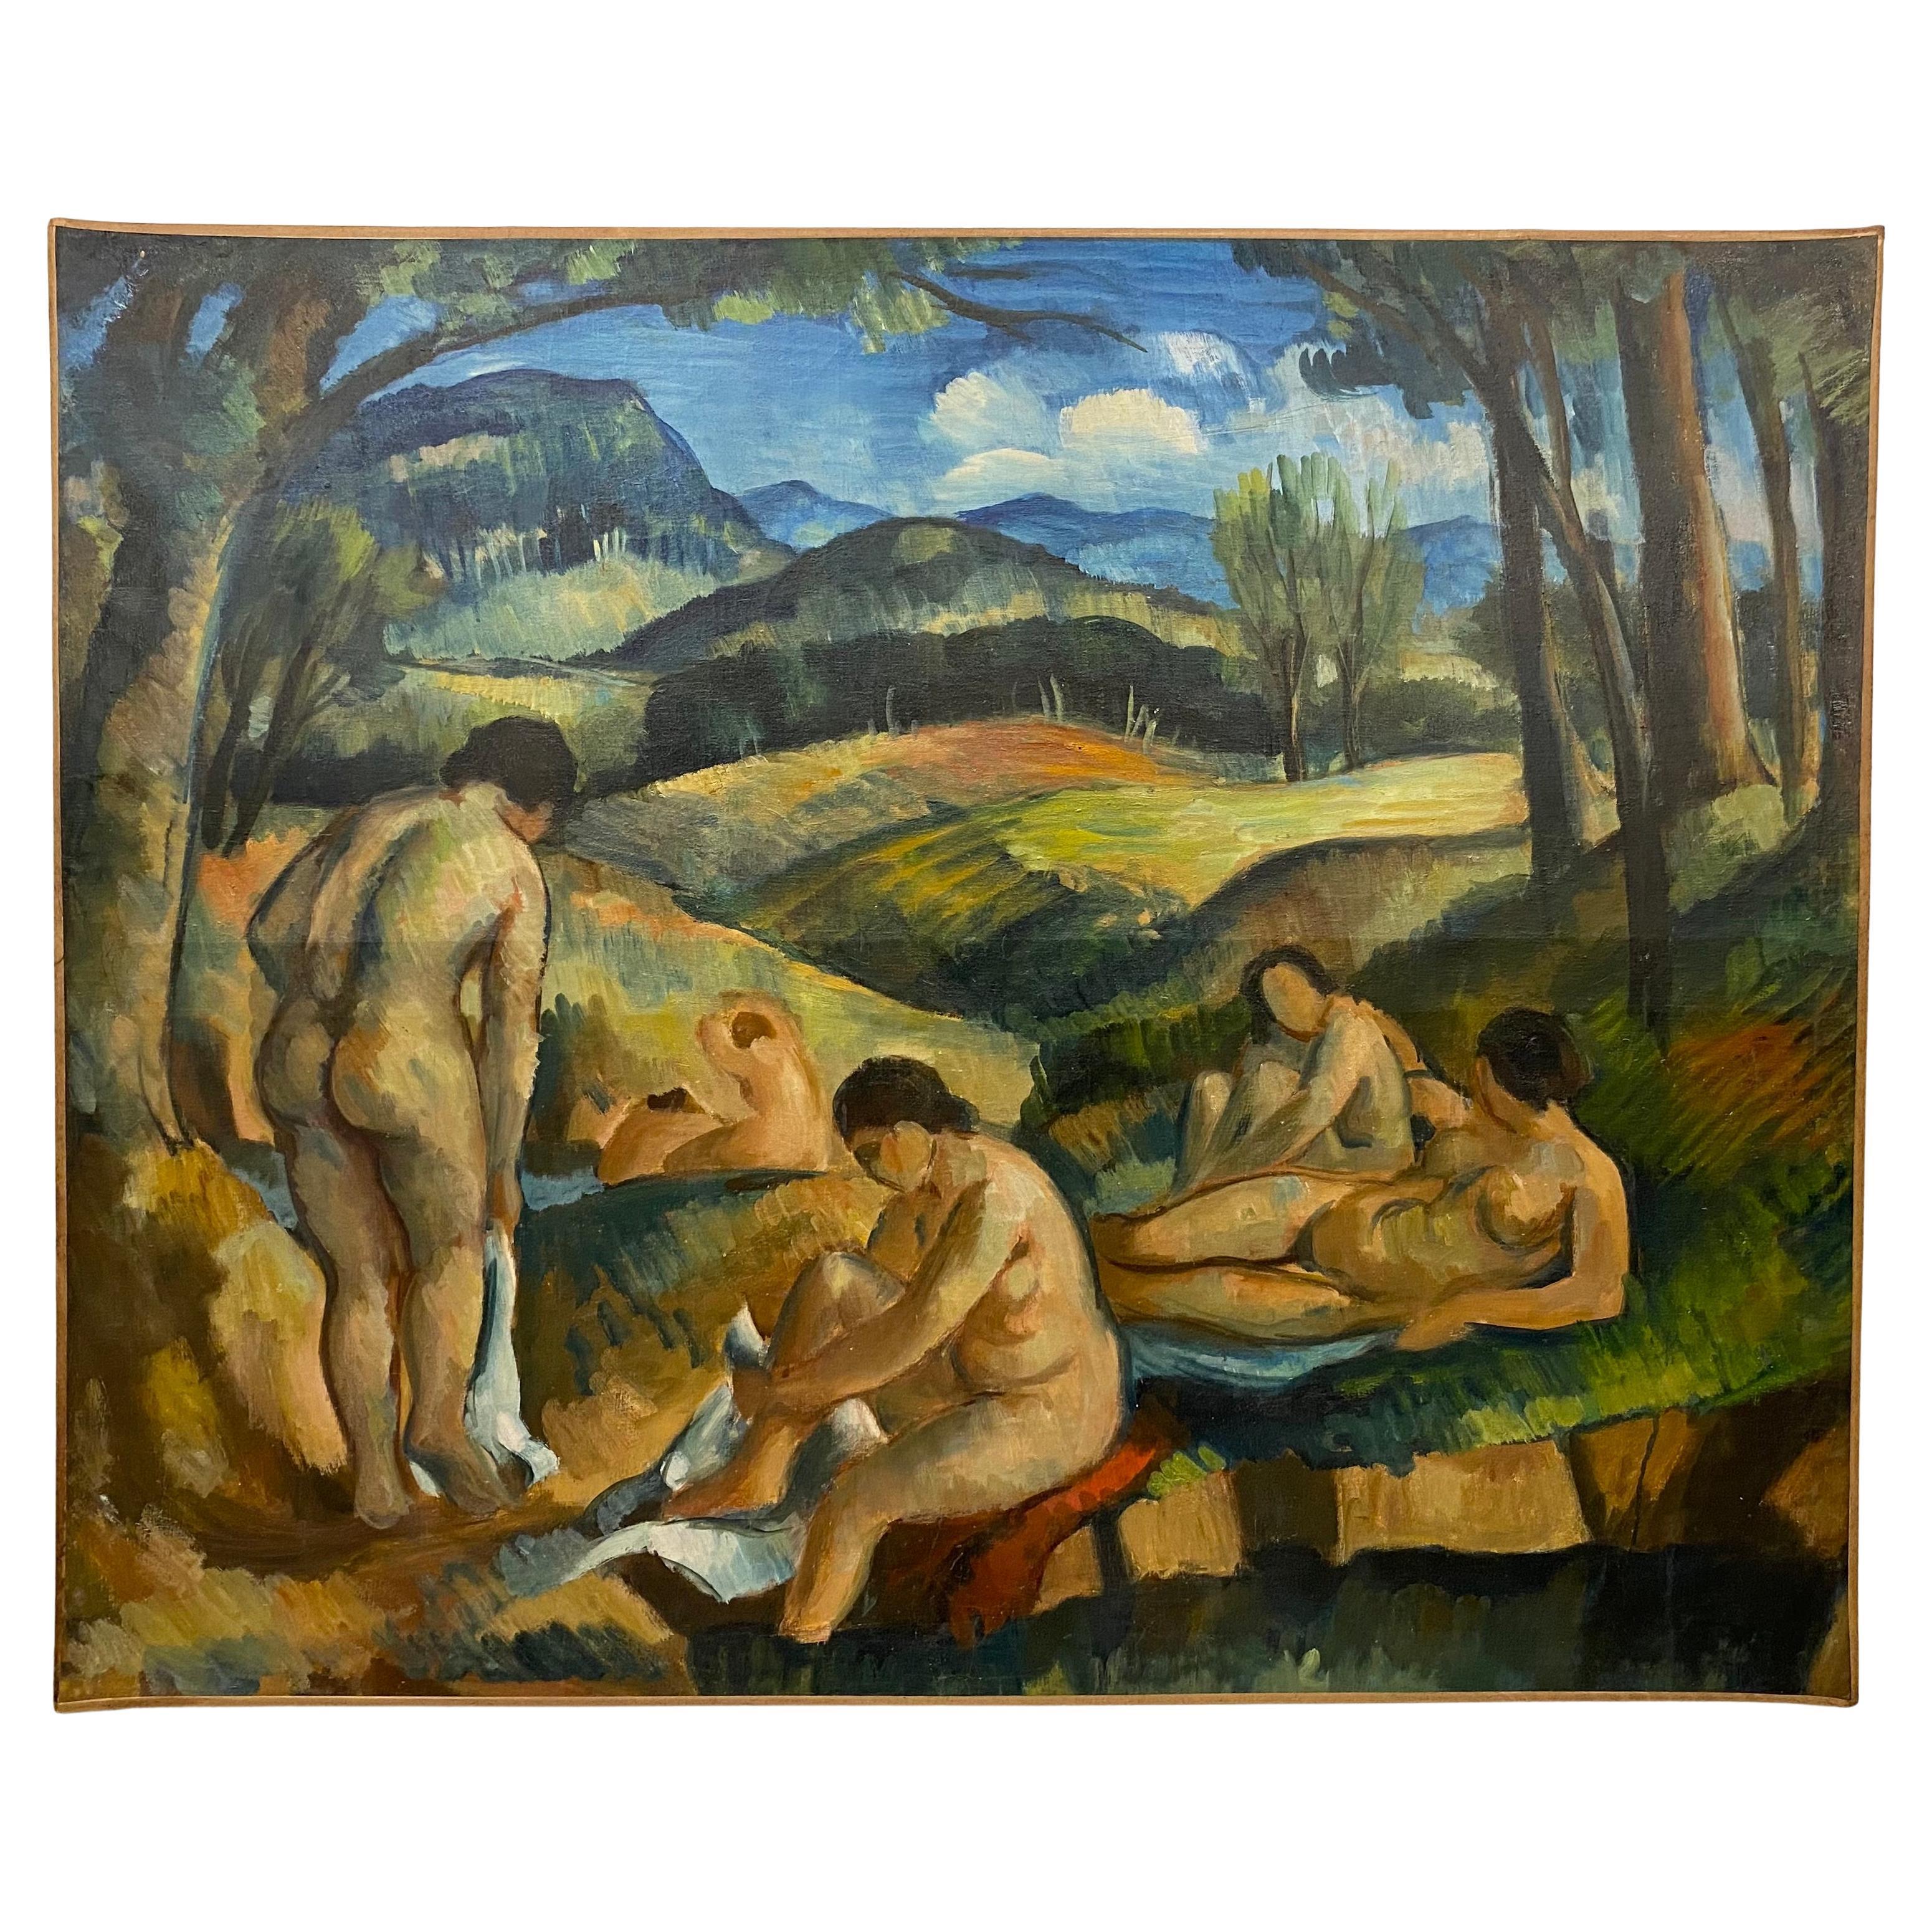 The Bathers Painting in the Manner of Paul Cezanne